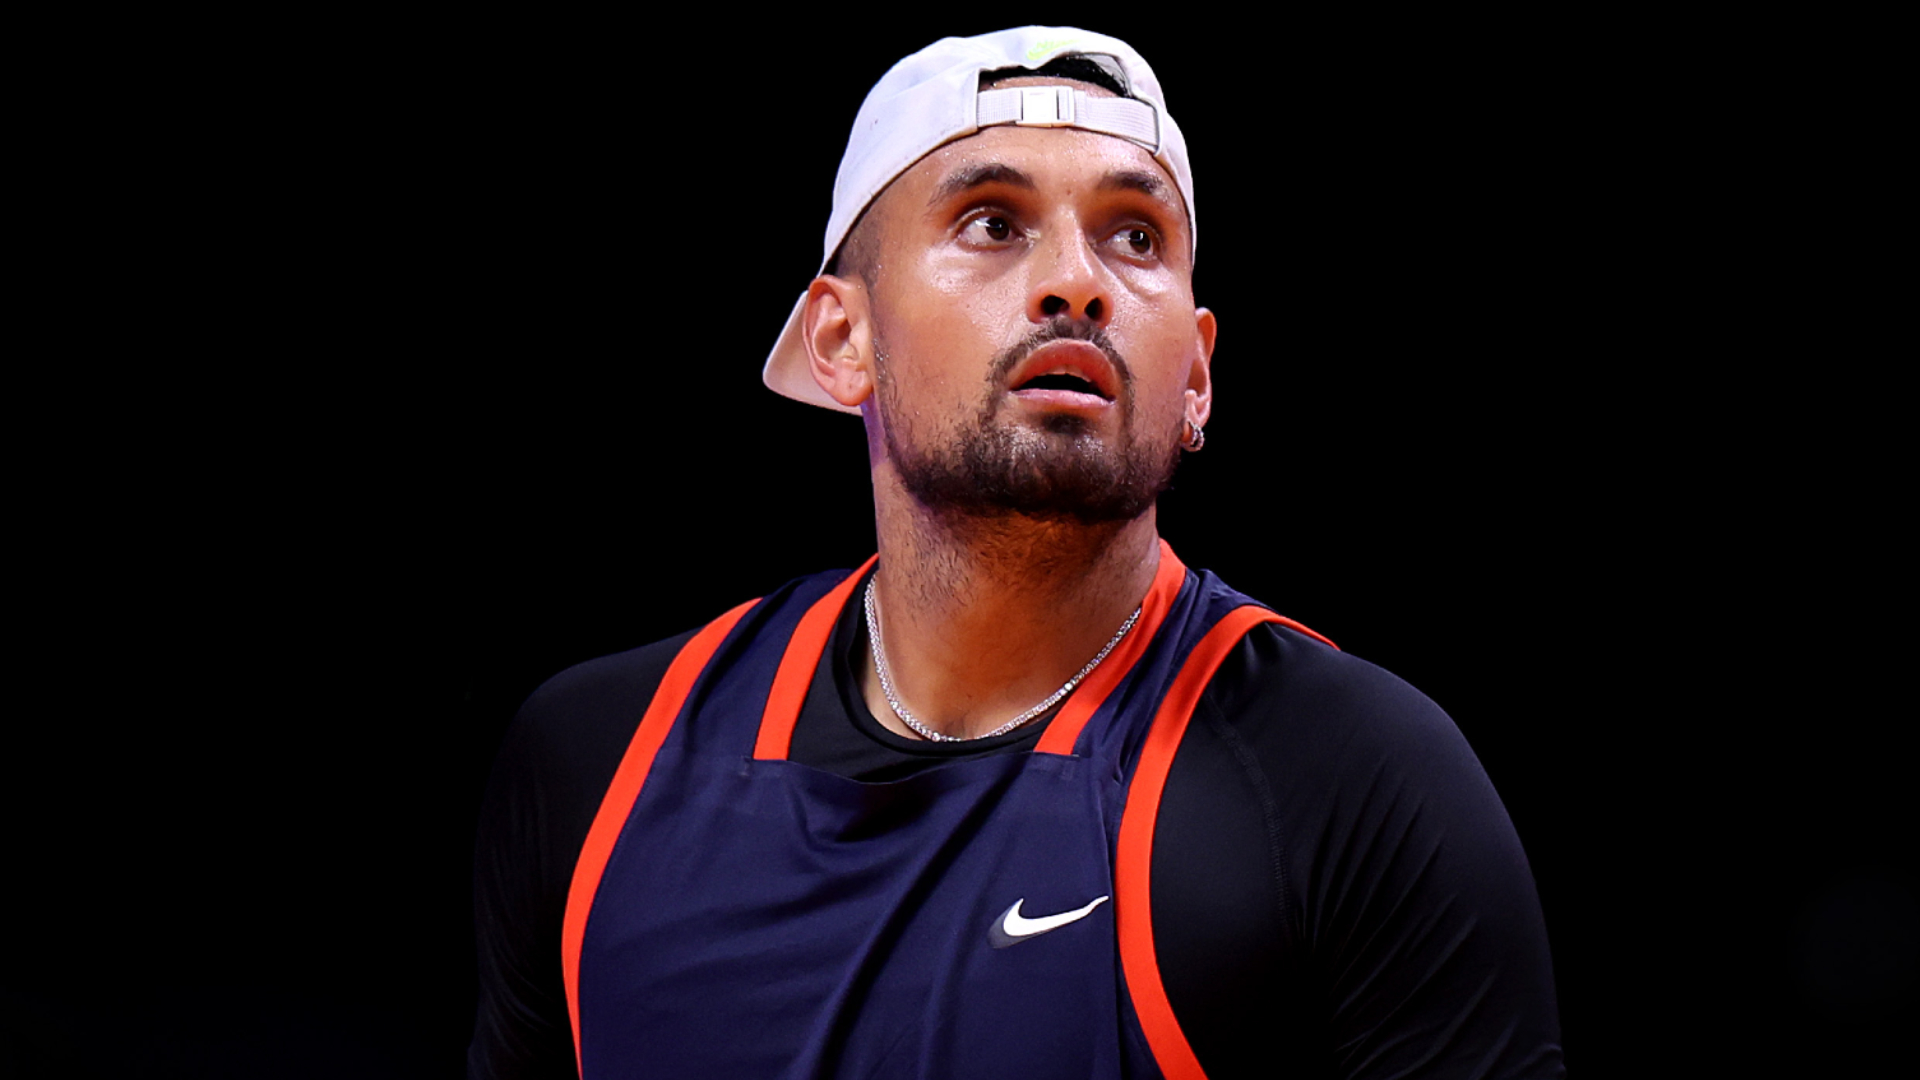 Kyrgios hints at retirement if he wins a slam beIN SPORTS